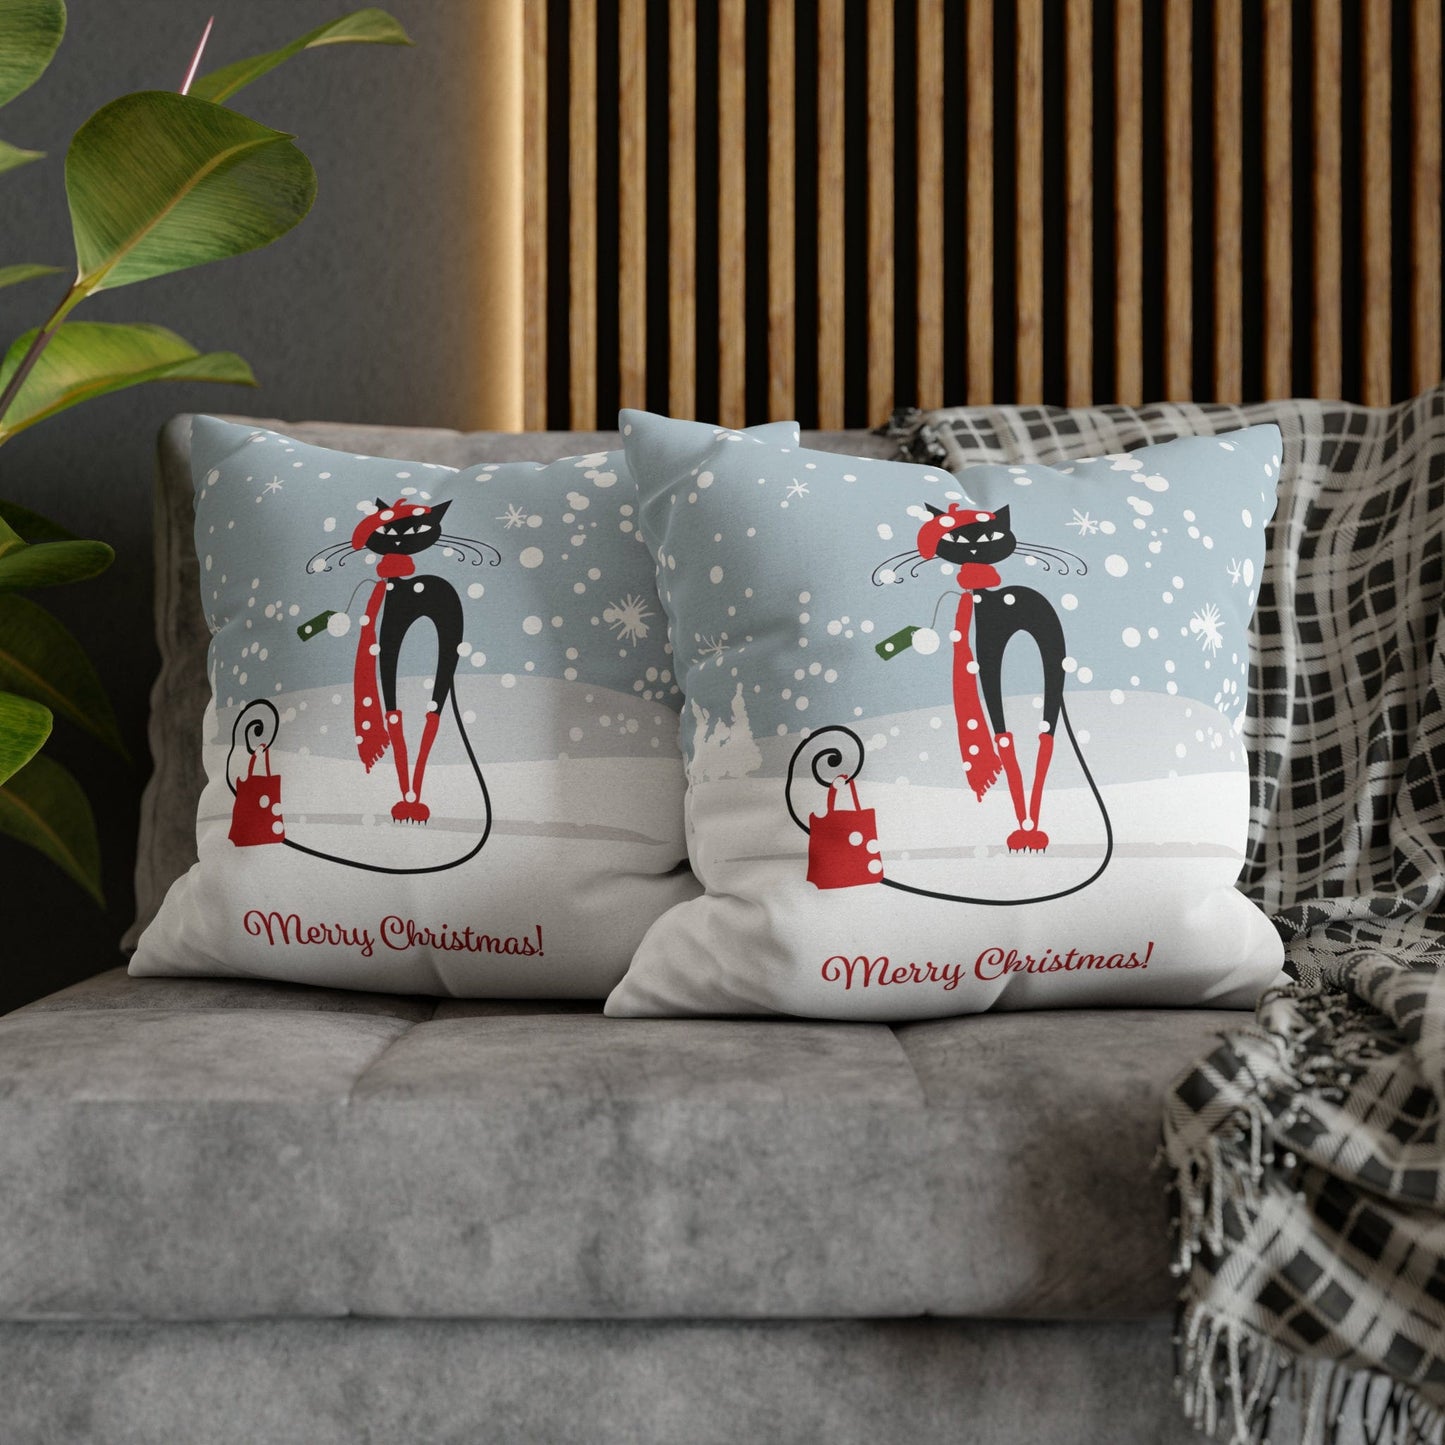 Kate McEnroe New York Atomic Cat Retro Christmas Pillow Cover, Mid Century Modern Snowy Christmas Yellow Cushion Covers, MCM Holiday Pillow Case Throw Pillow Covers